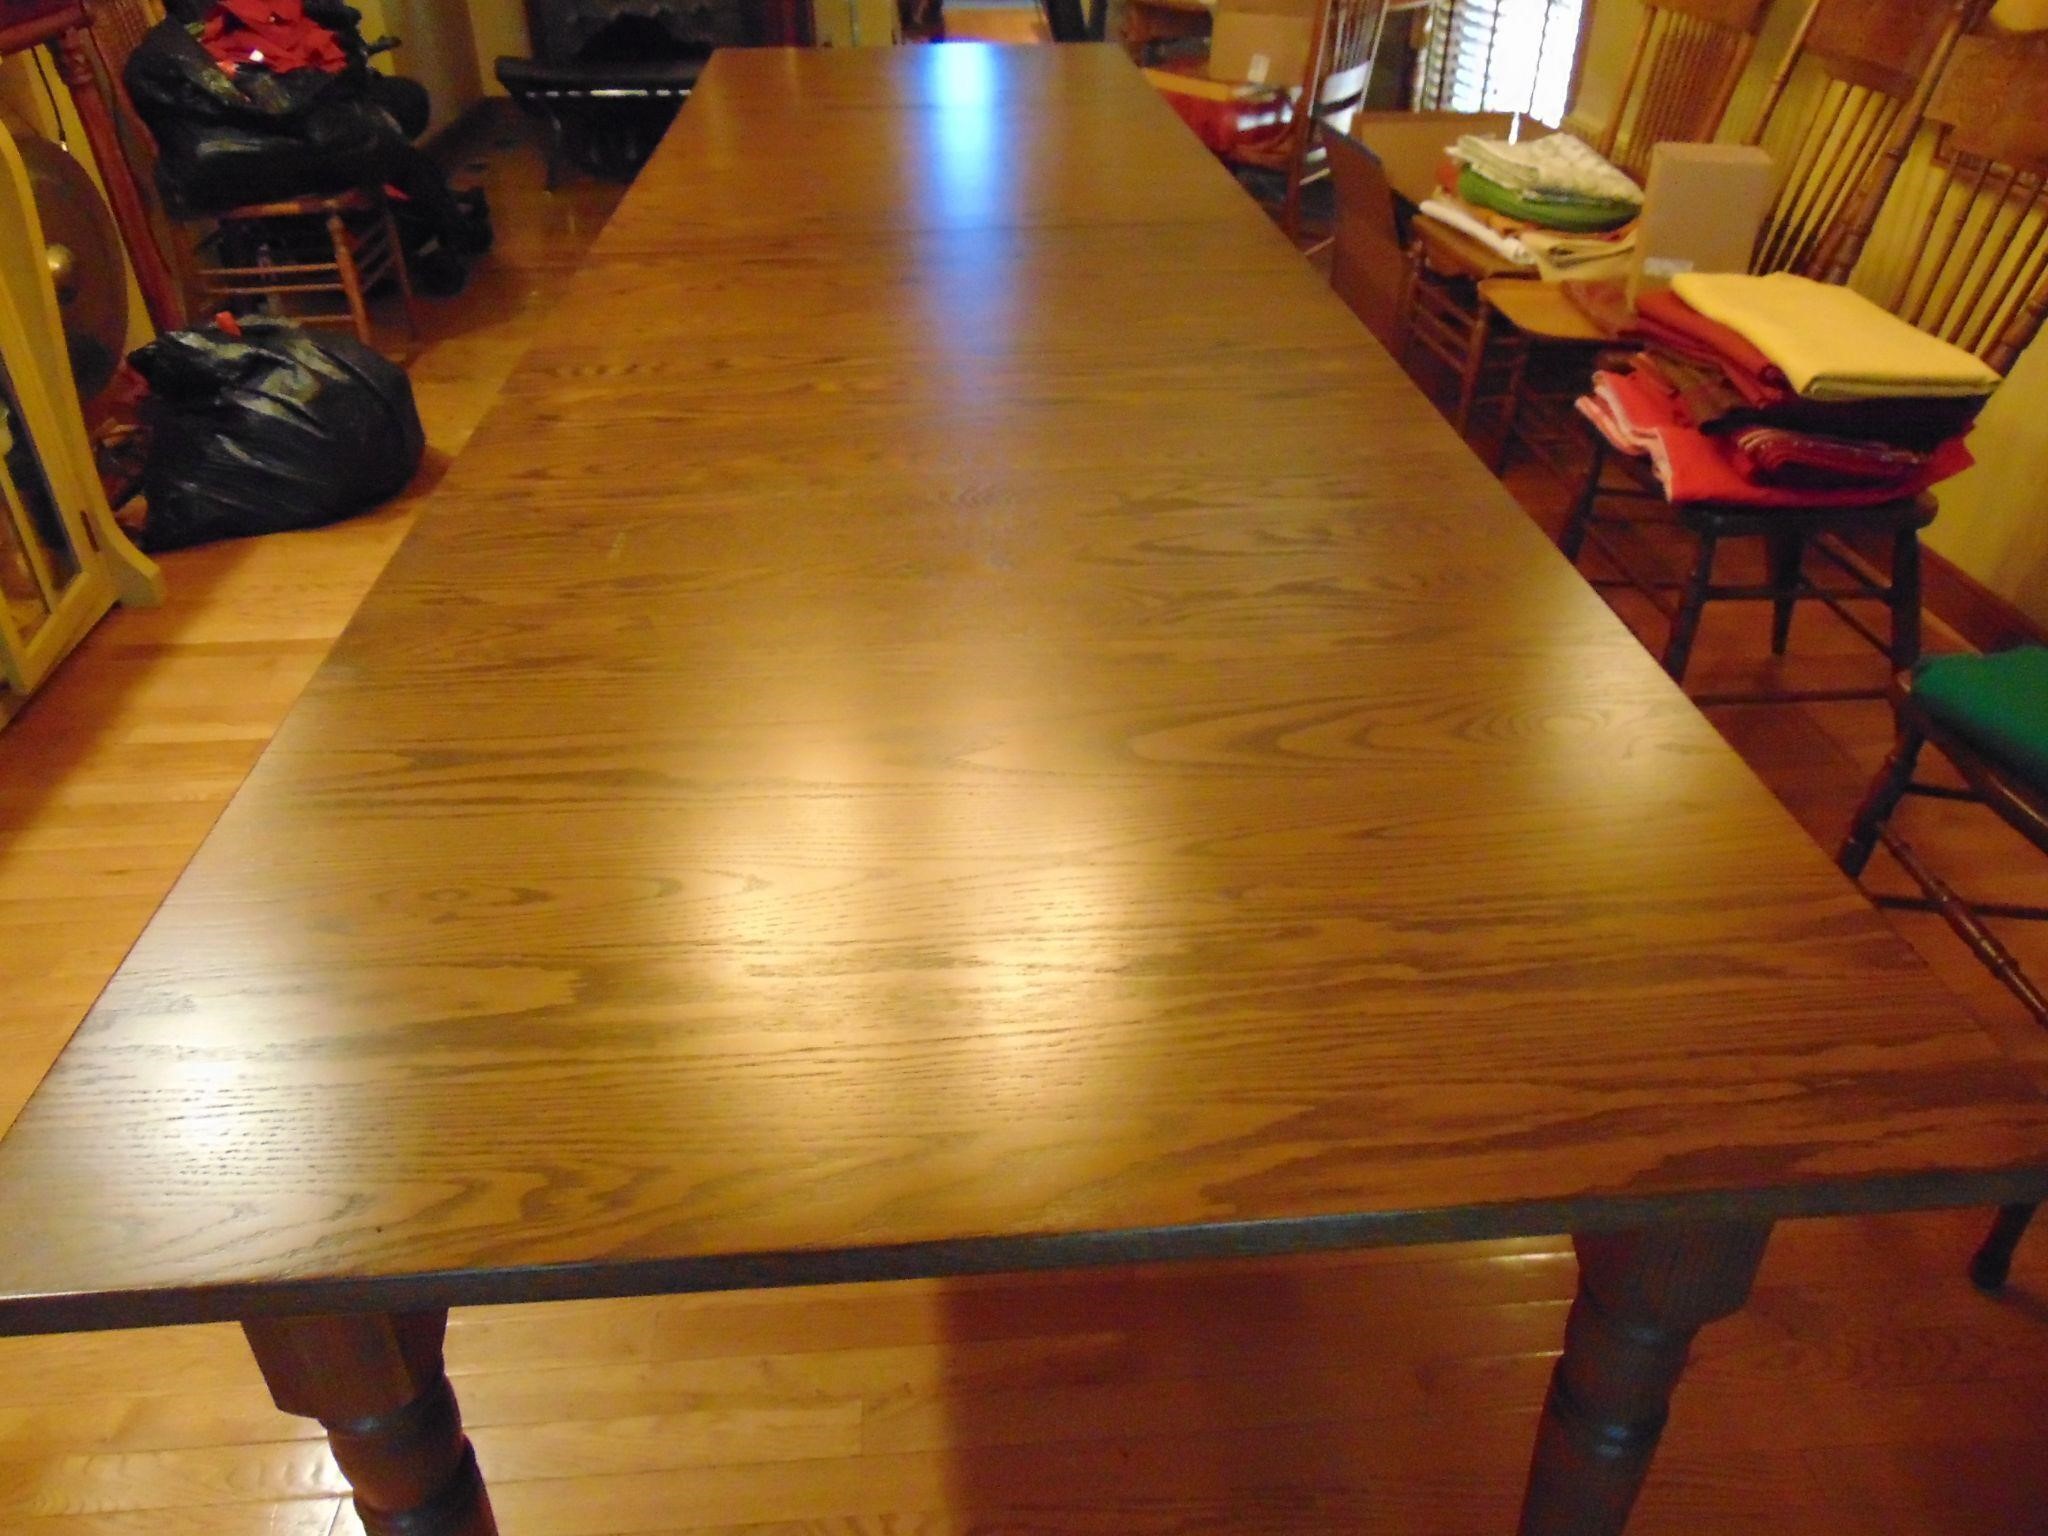 16 Ft Long Wood Dining Room Table. Table has 4 12"